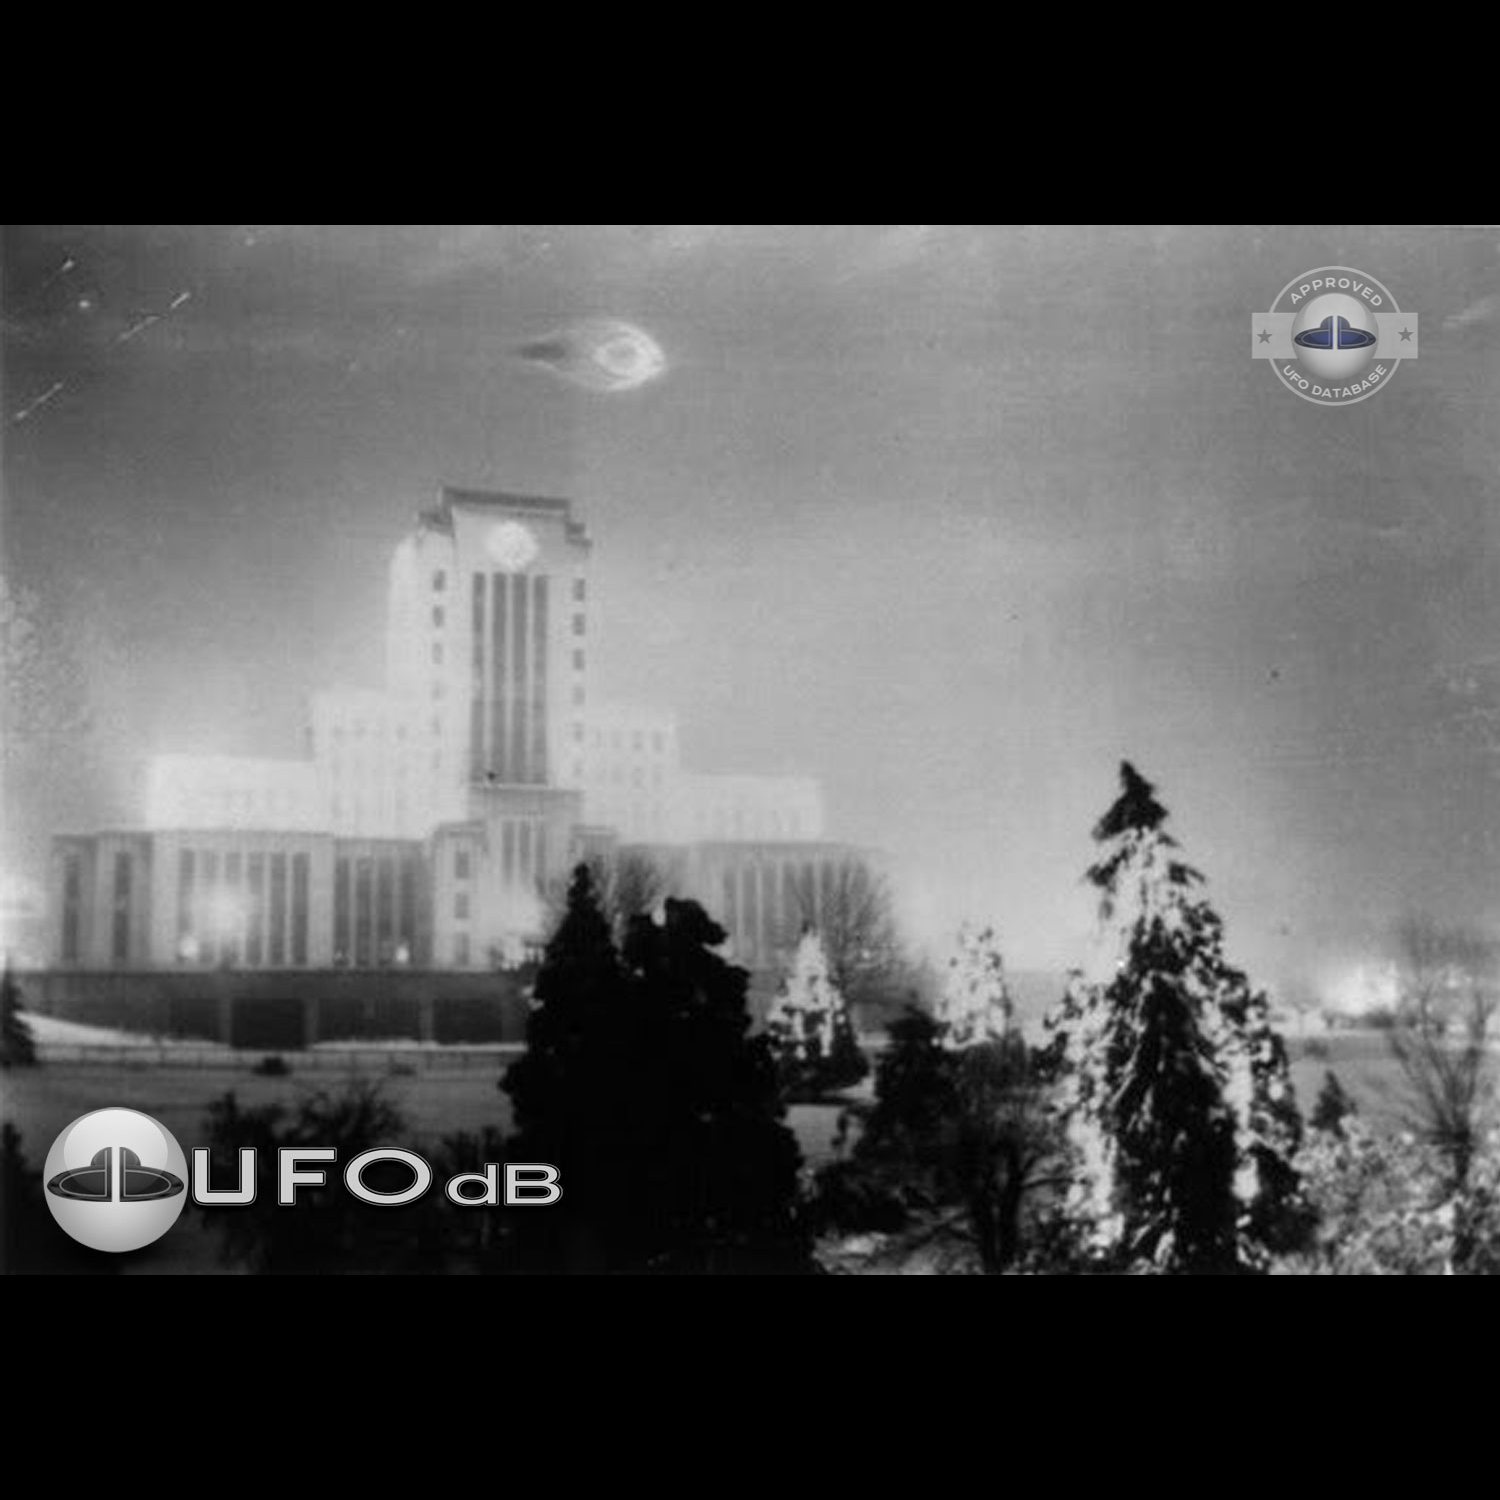 UFO moved straight in the sky stopping over flagpole of the city hall UFO Picture #87-1